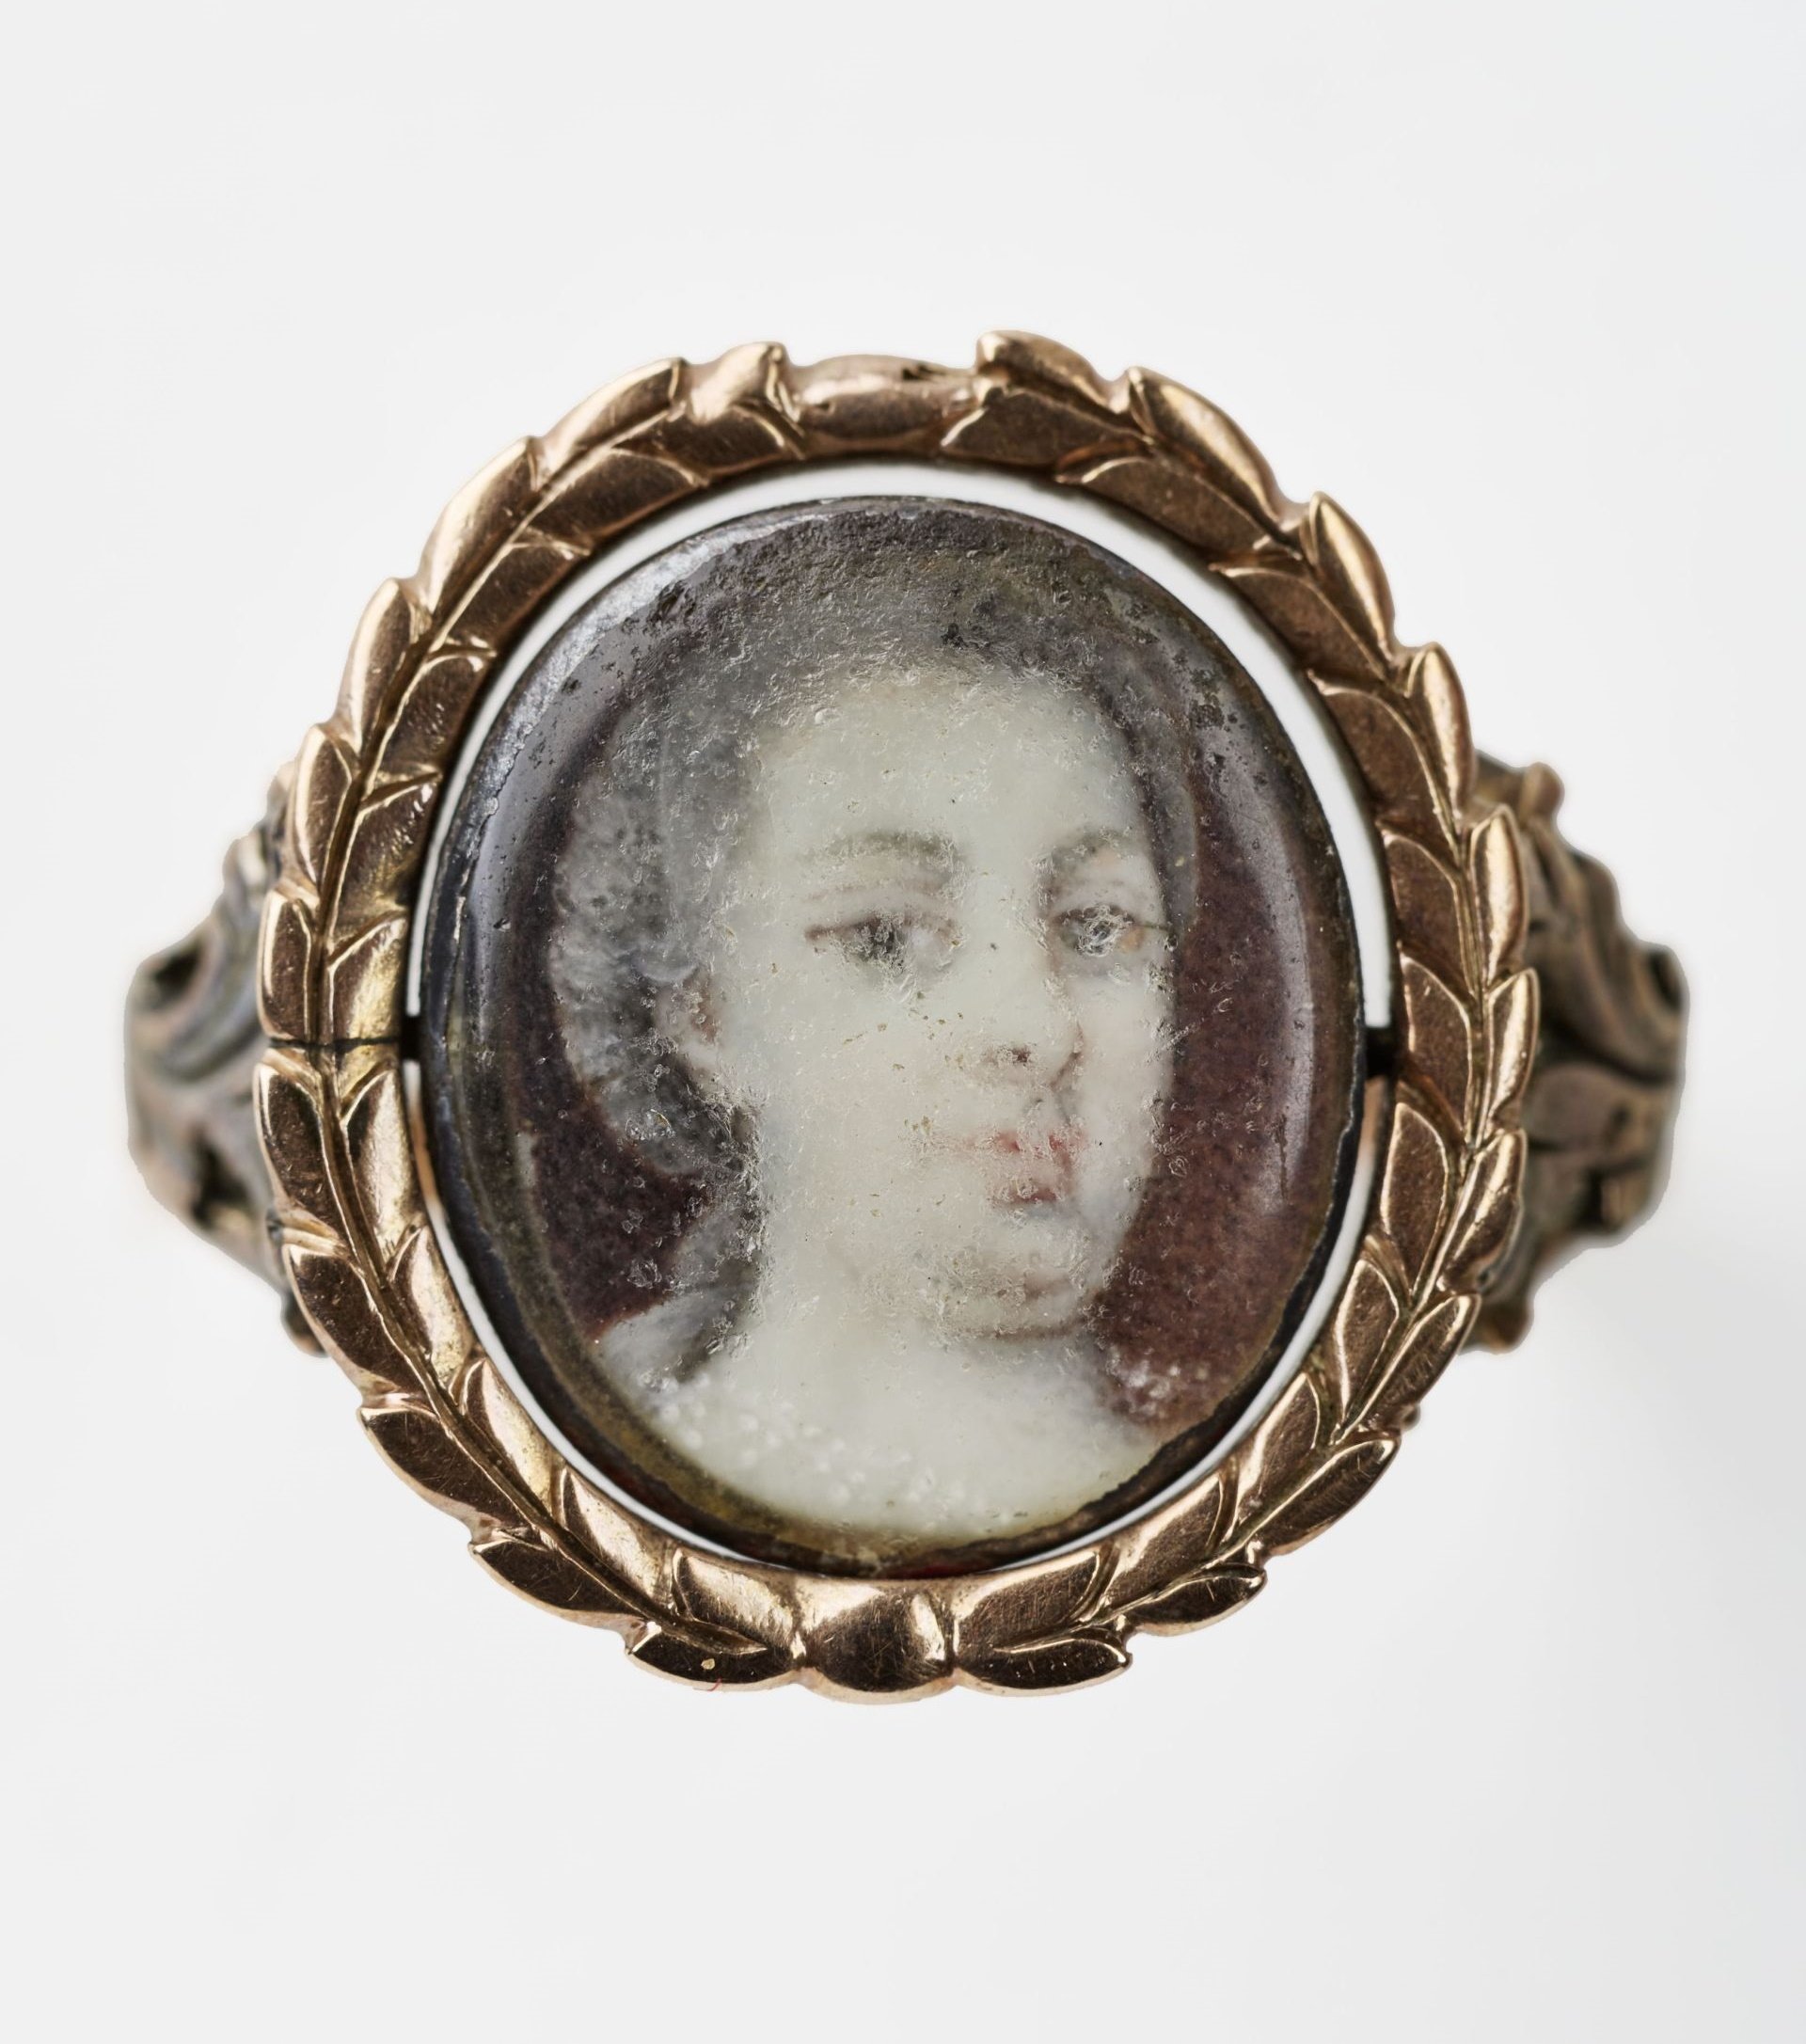 Fingerring mit den Porträts Franz I. Stephan und Maria Theresias (Museum August Kestner CC BY-NC-SA)